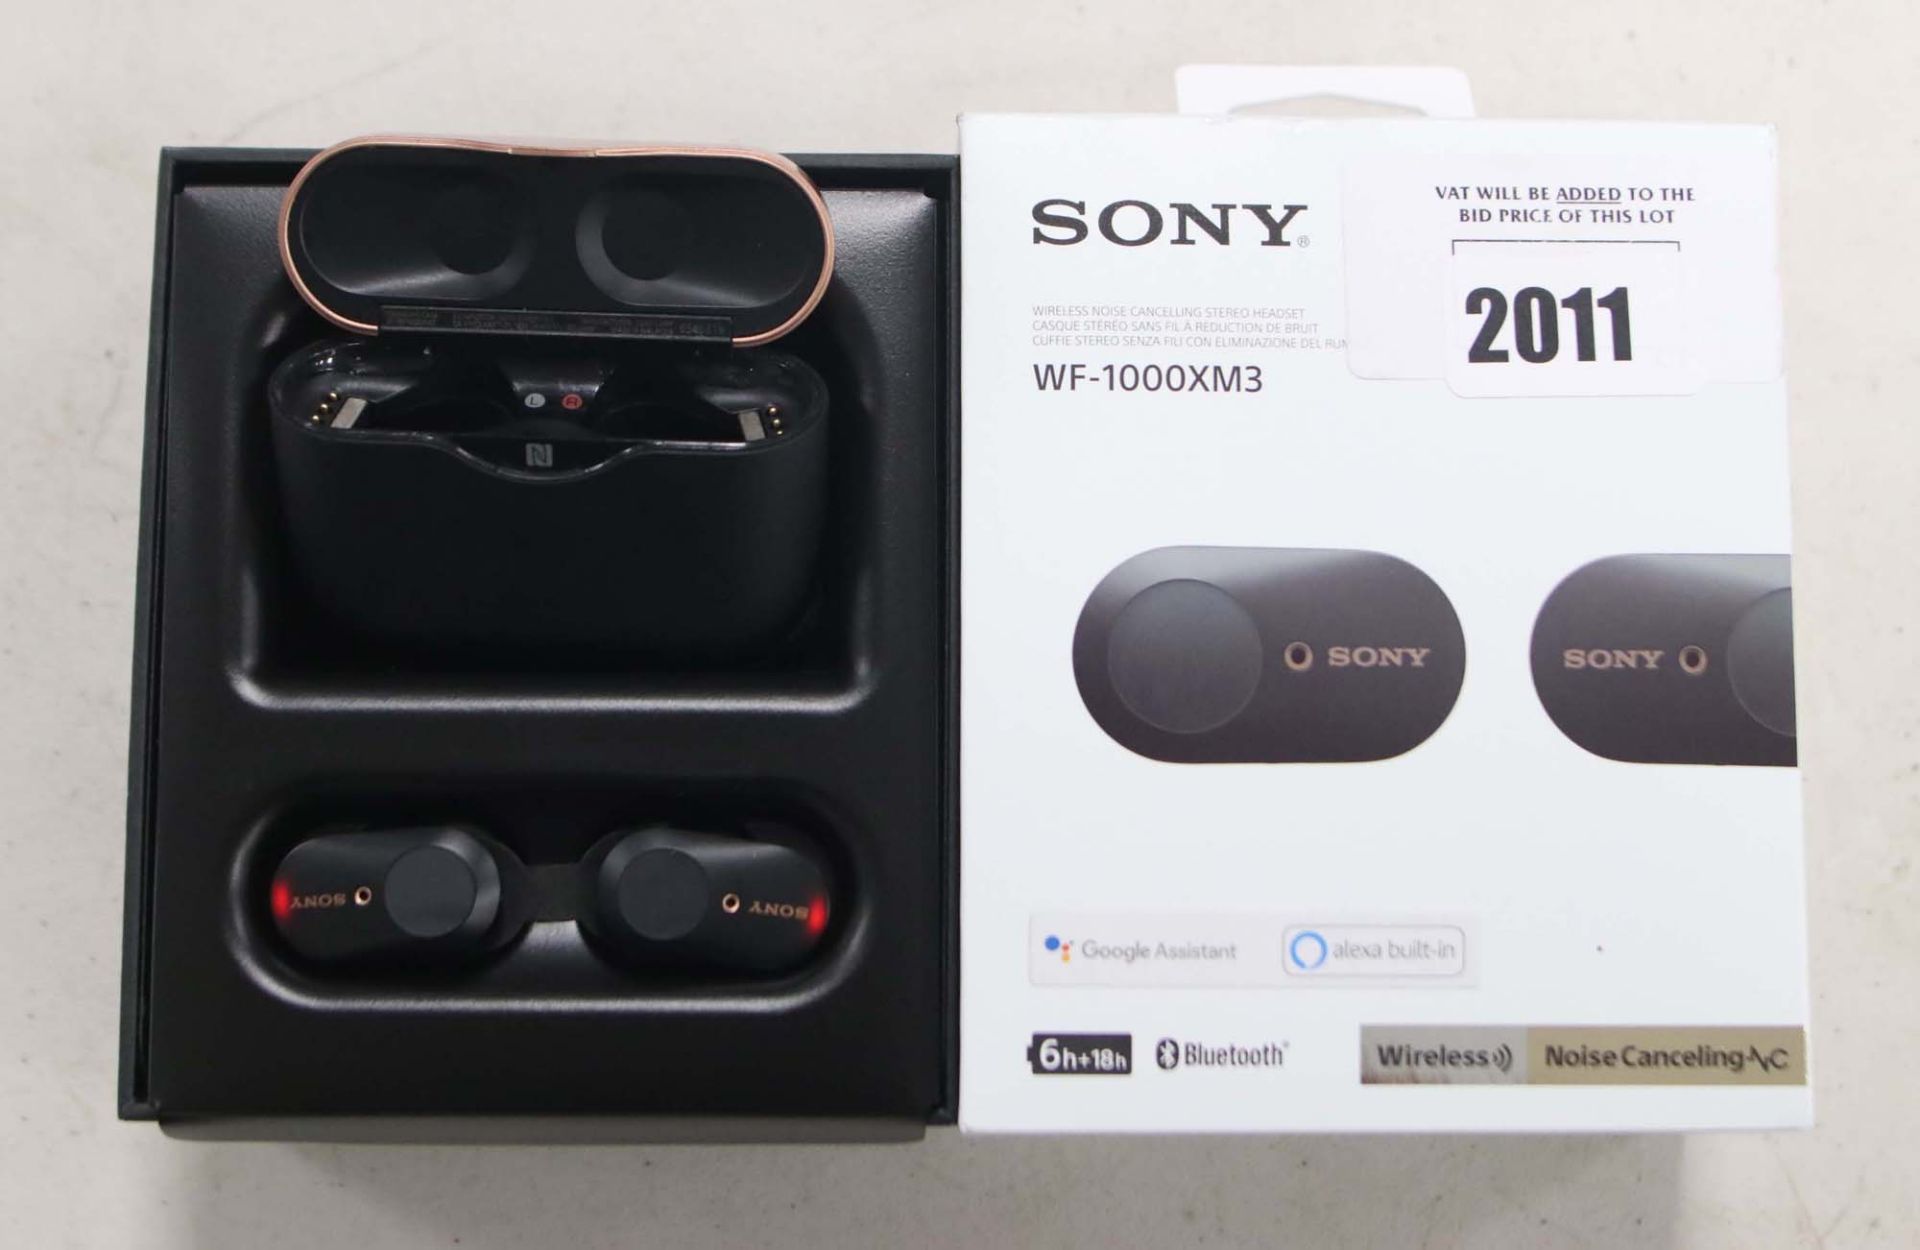 Sony WF-1000XM3 wireless noise cancelling headphones with charging case and box